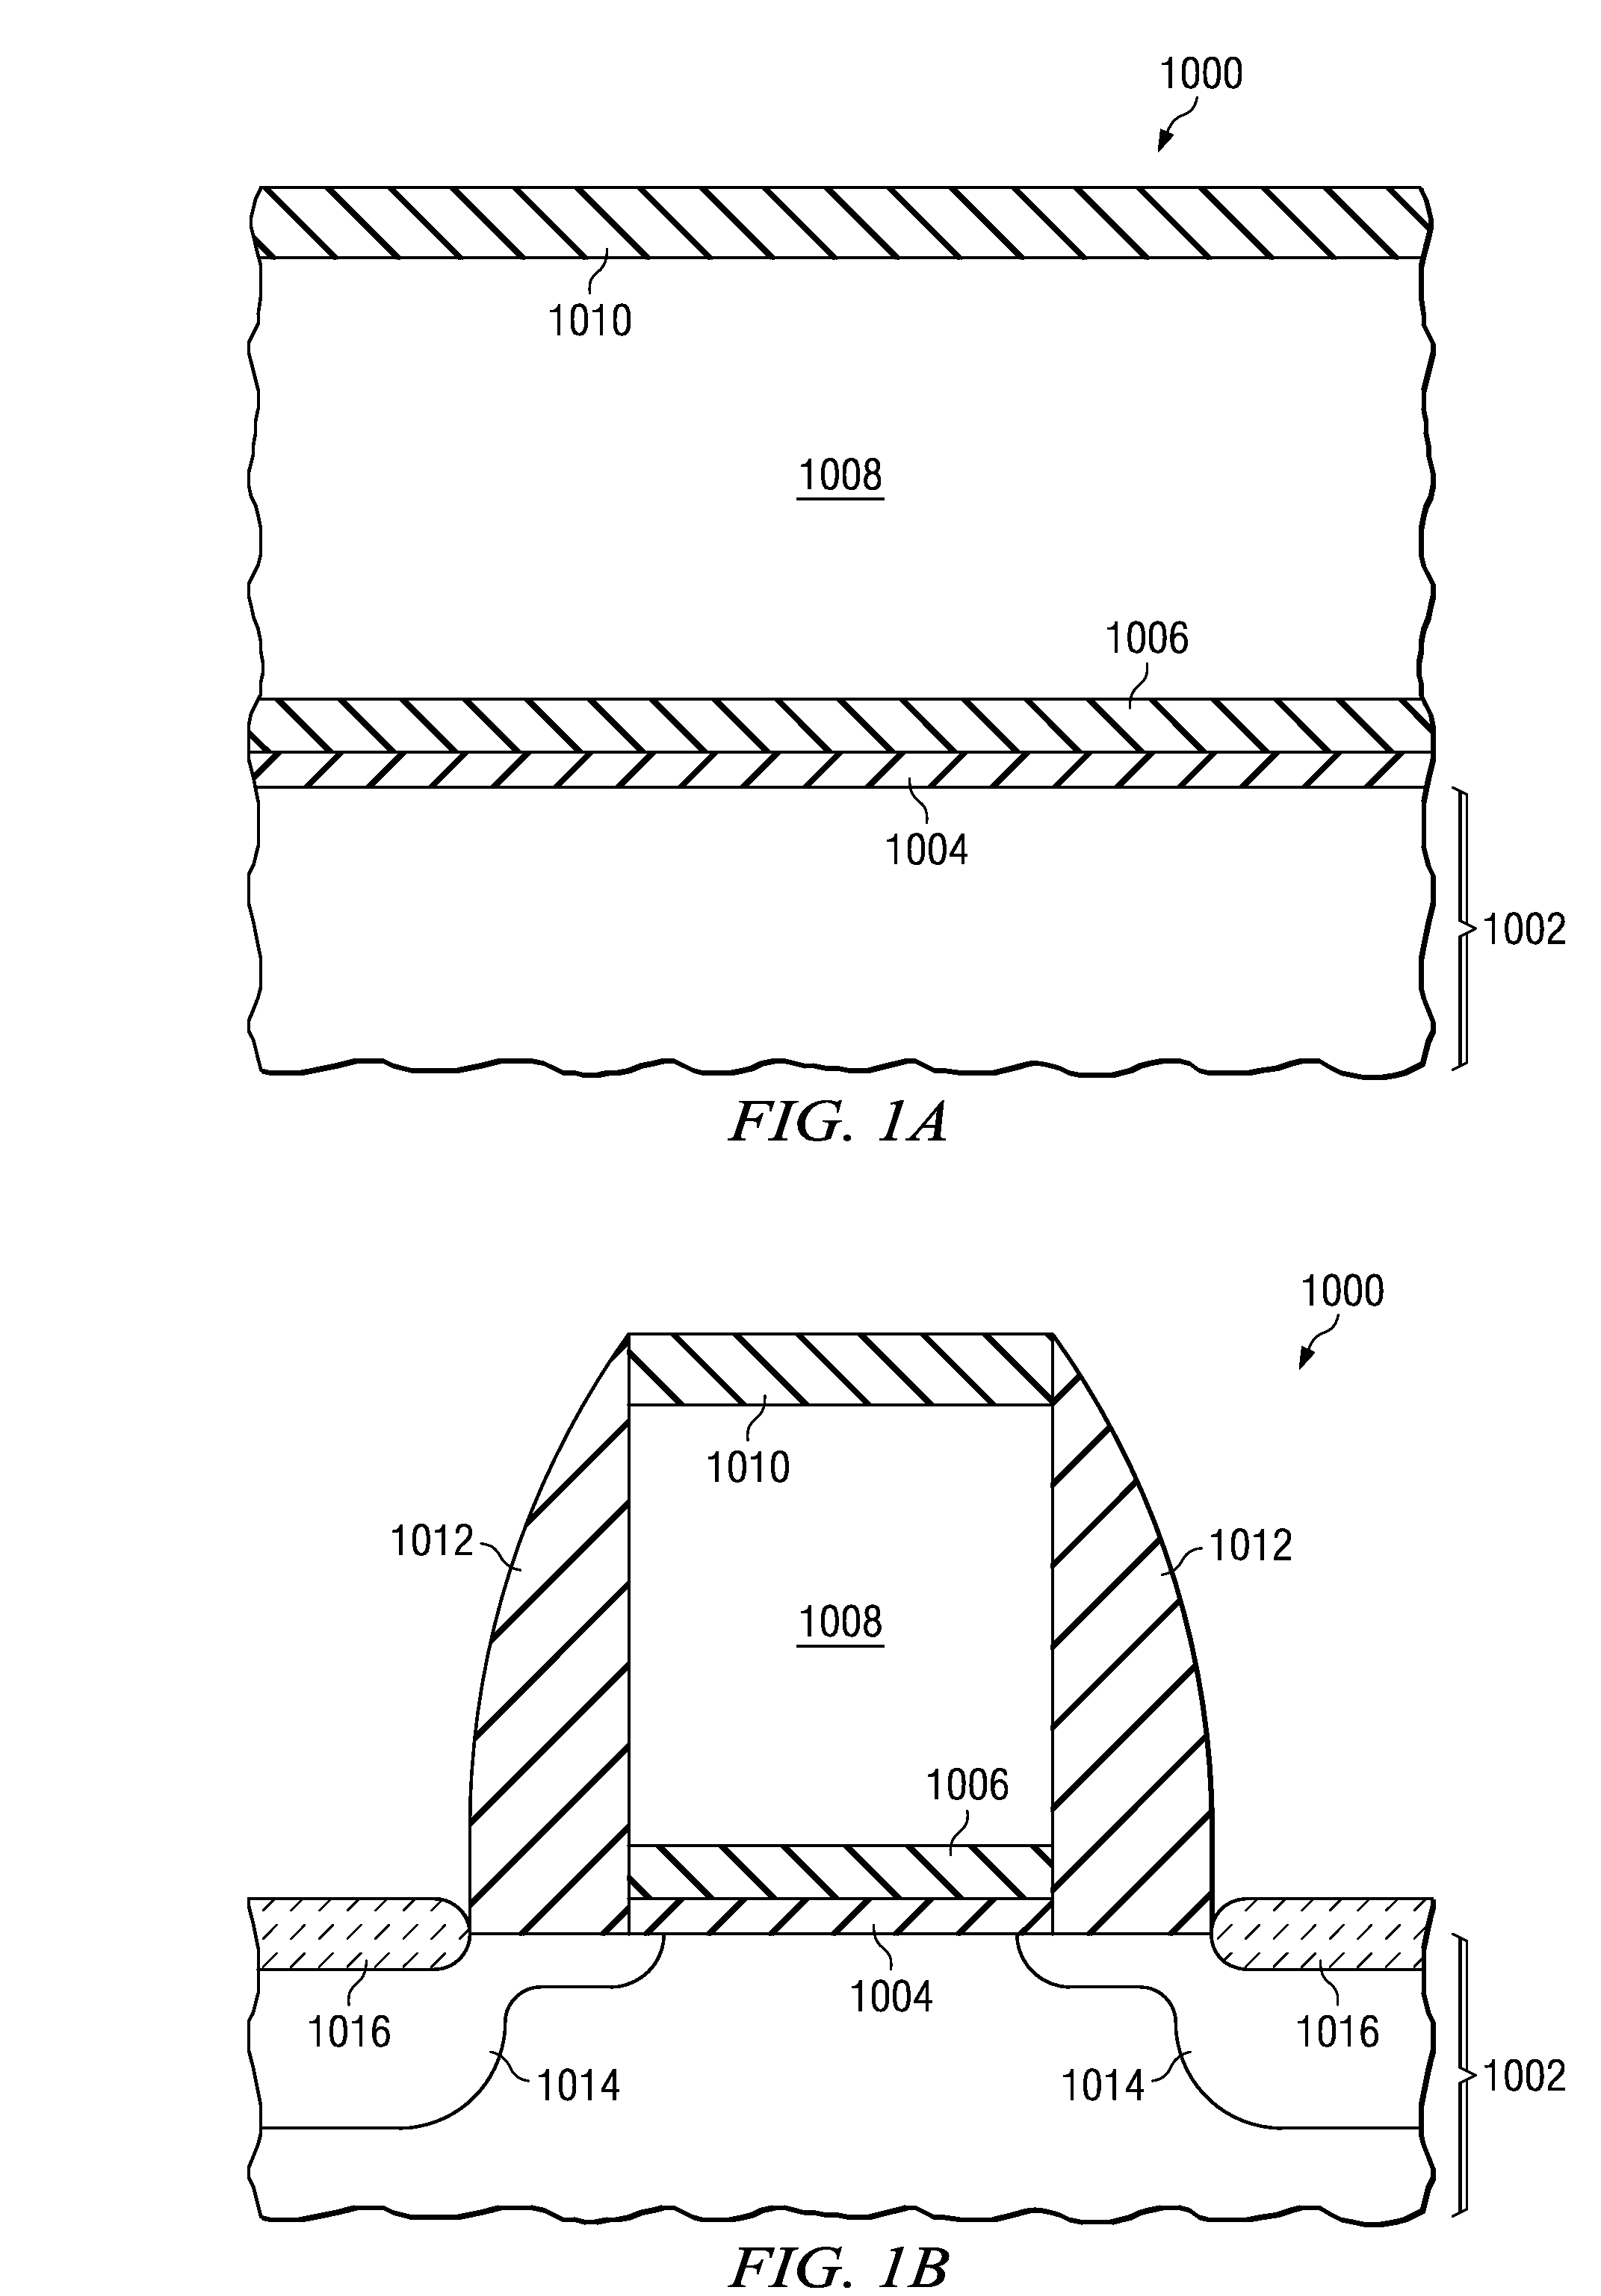 Methods to Enhance Effective Work Function of Mid-Gap Metal by Incorporating Oxygen and Hydrogen at a Low Thermal Budget